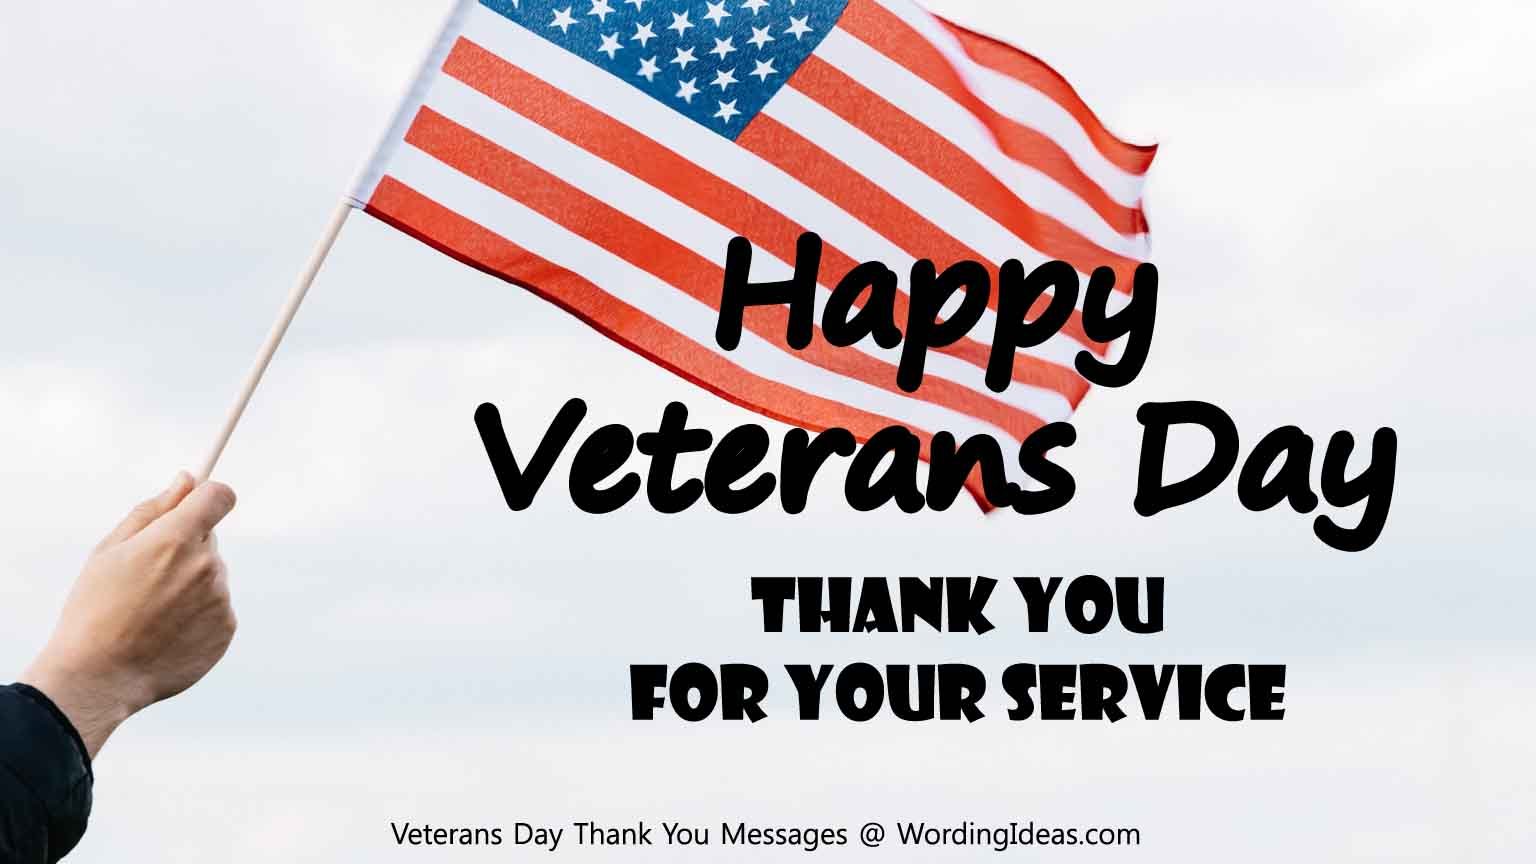 Veterans Day Thank You Messages and Quotes » Wording Ideas